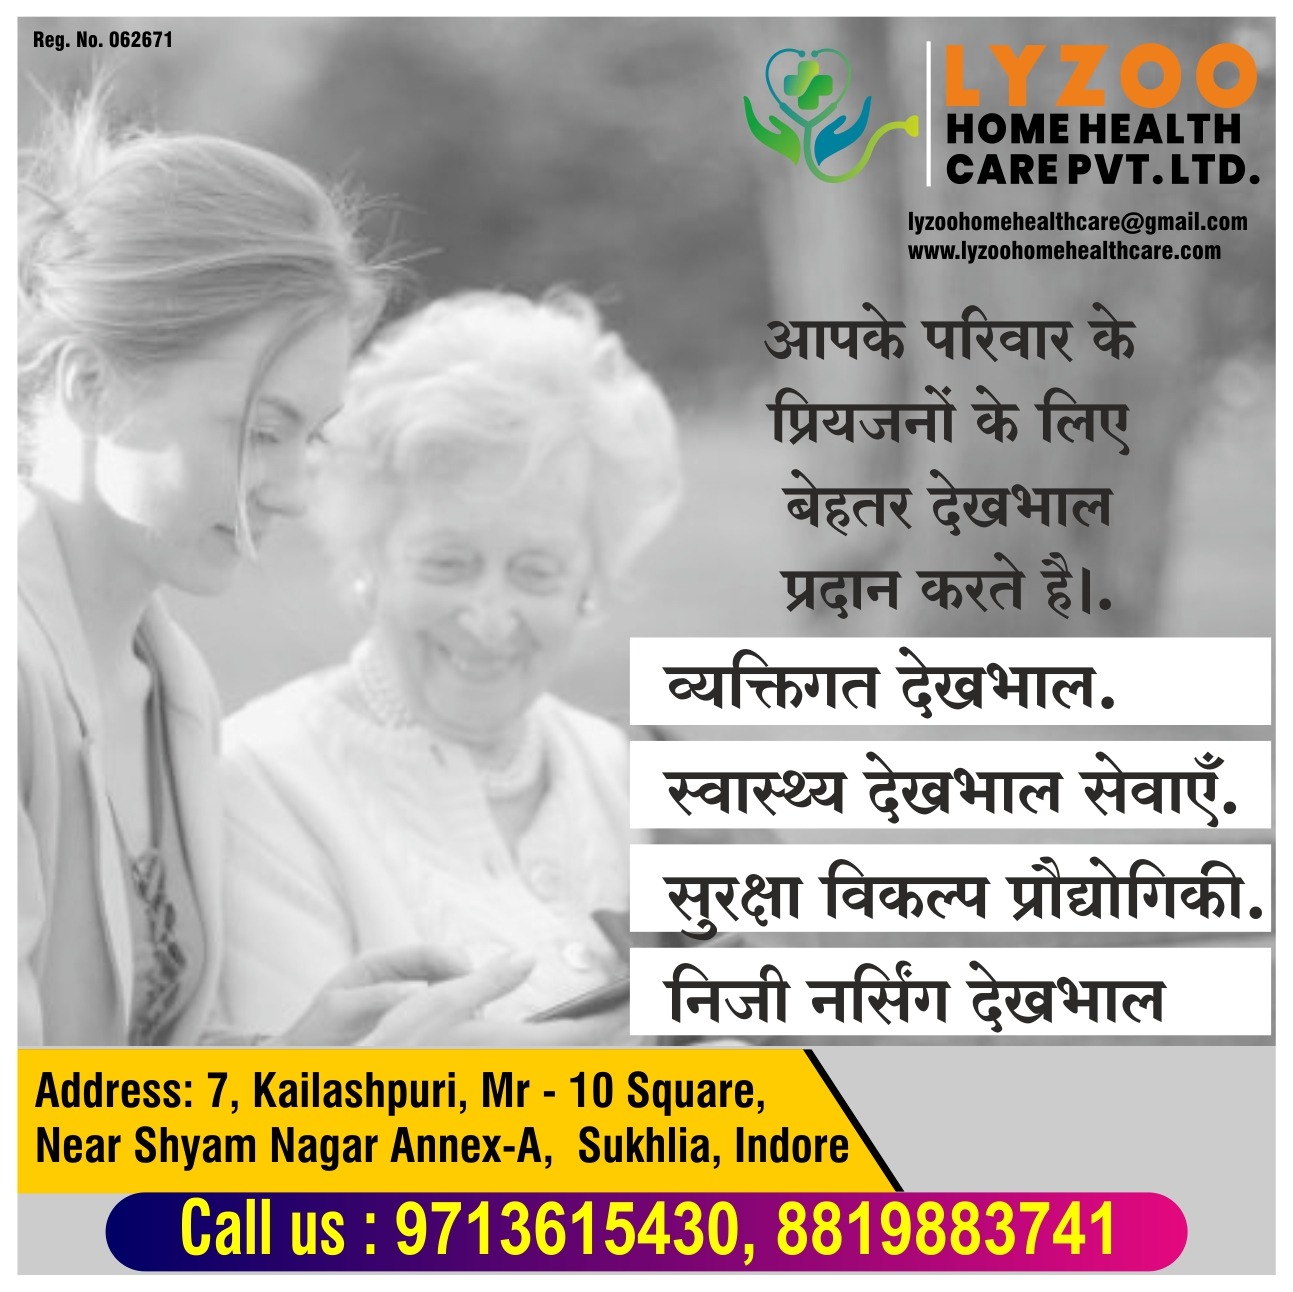 Best home healthcare services for oldage people in Indore